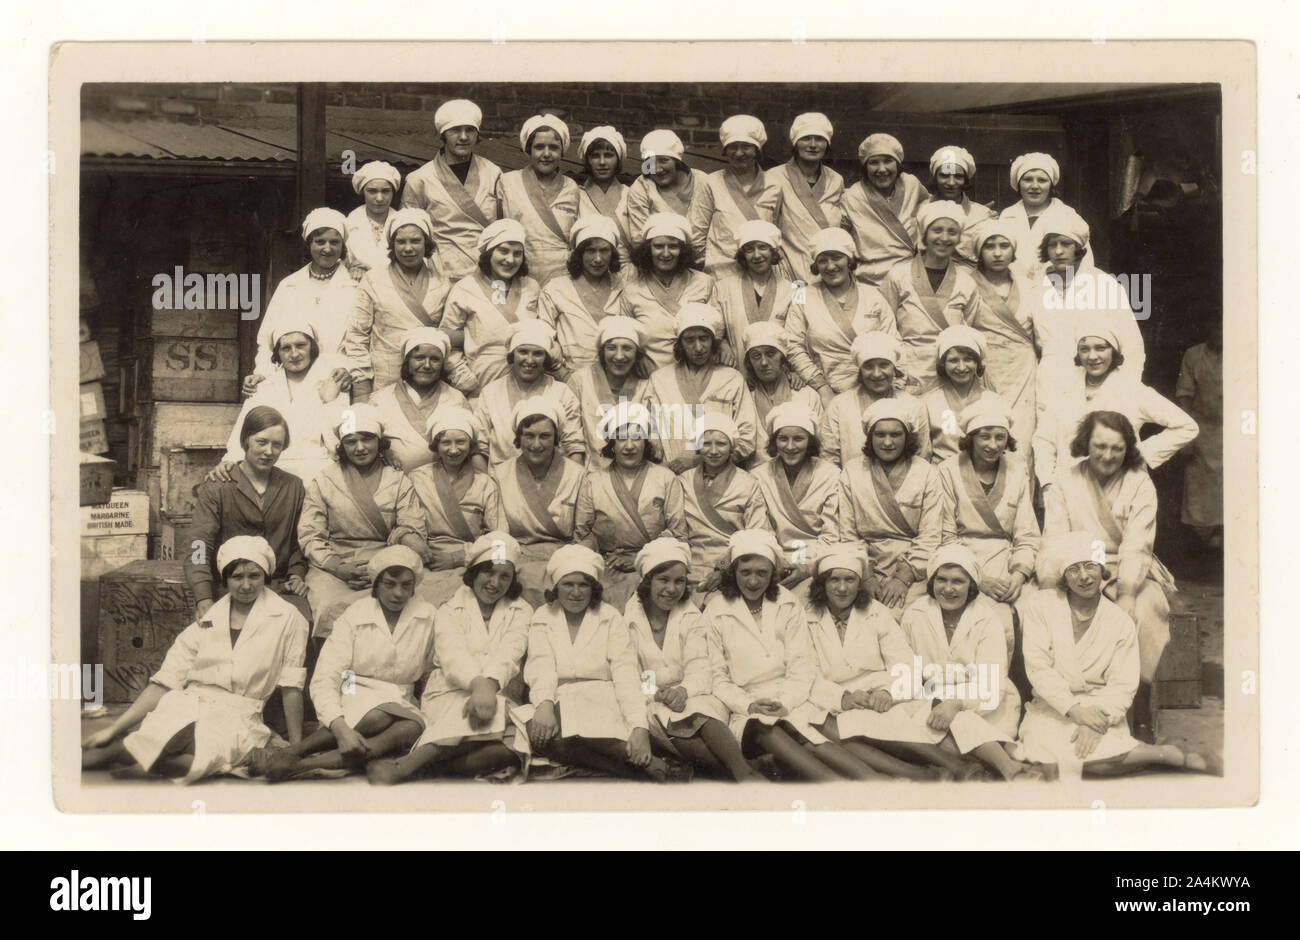 Early 1900's postcard of large group of female Mayqueen Margarine factory workers posing for a company photograph, wearing uniforms and caps,  Mayqueen Margarine printed on crate, circa 1920's, possibly Lancashire, U.K Stock Photo